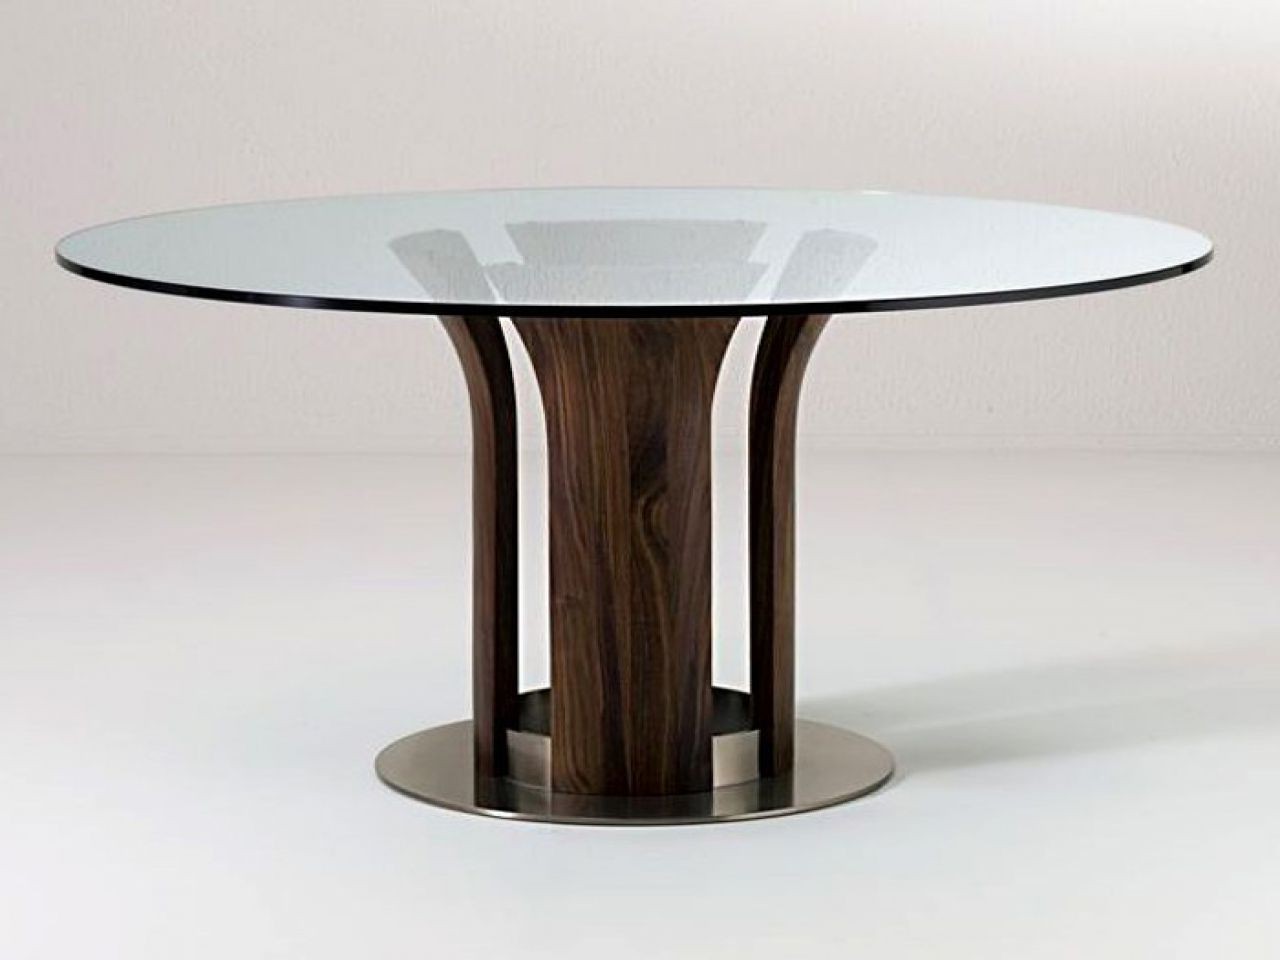 Pedestal for glass table